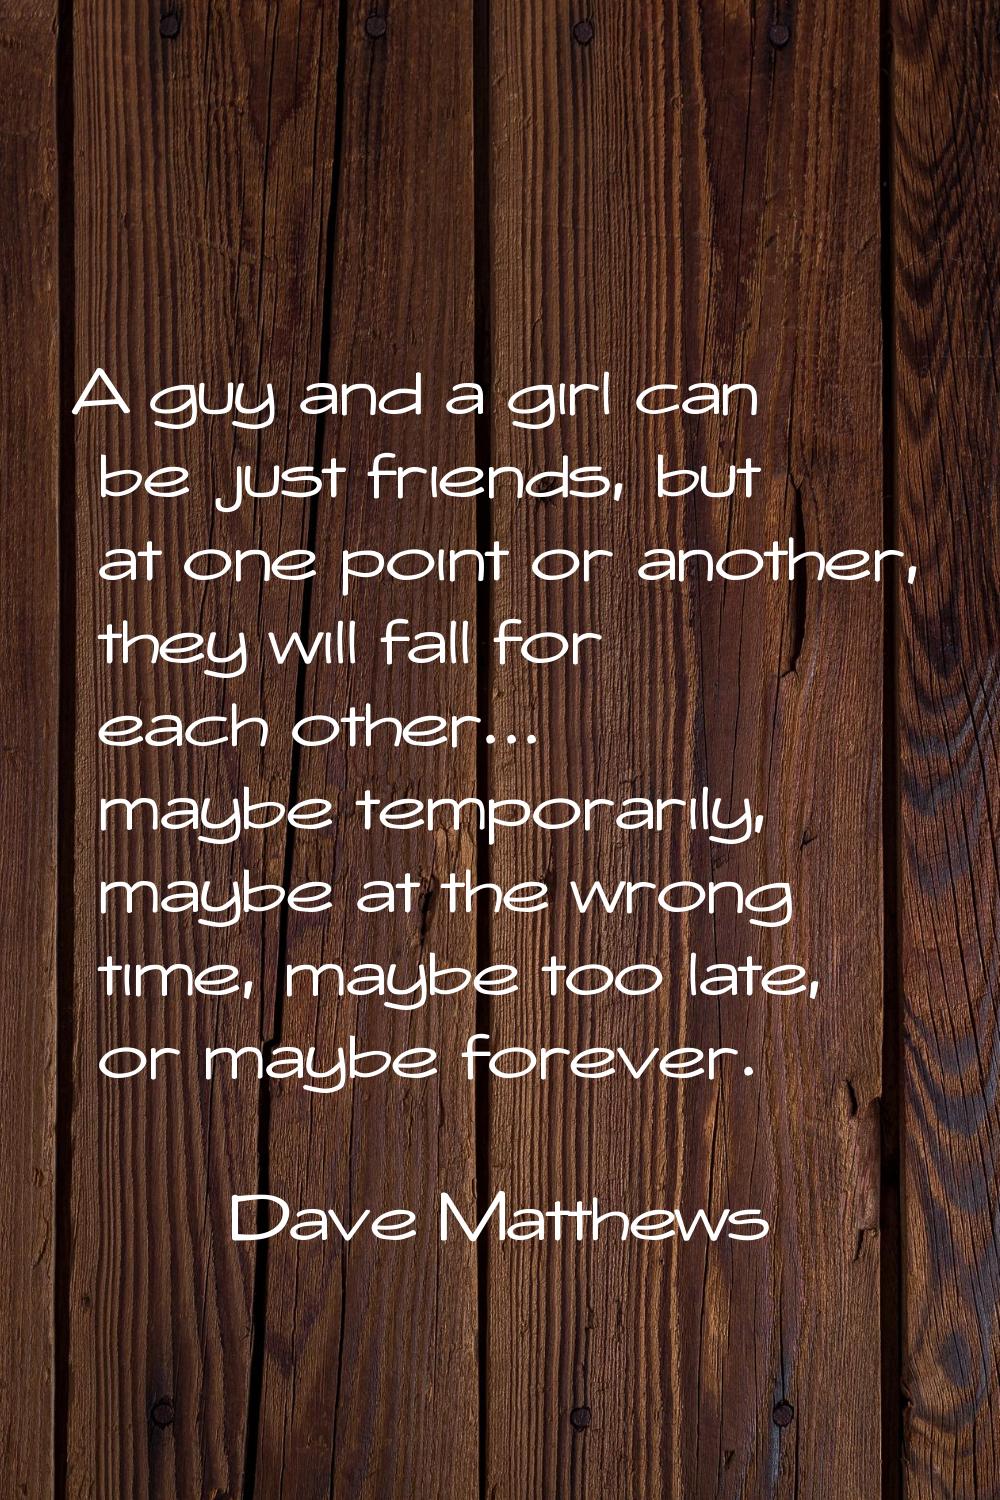 A guy and a girl can be just friends, but at one point or another, they will fall for each other...